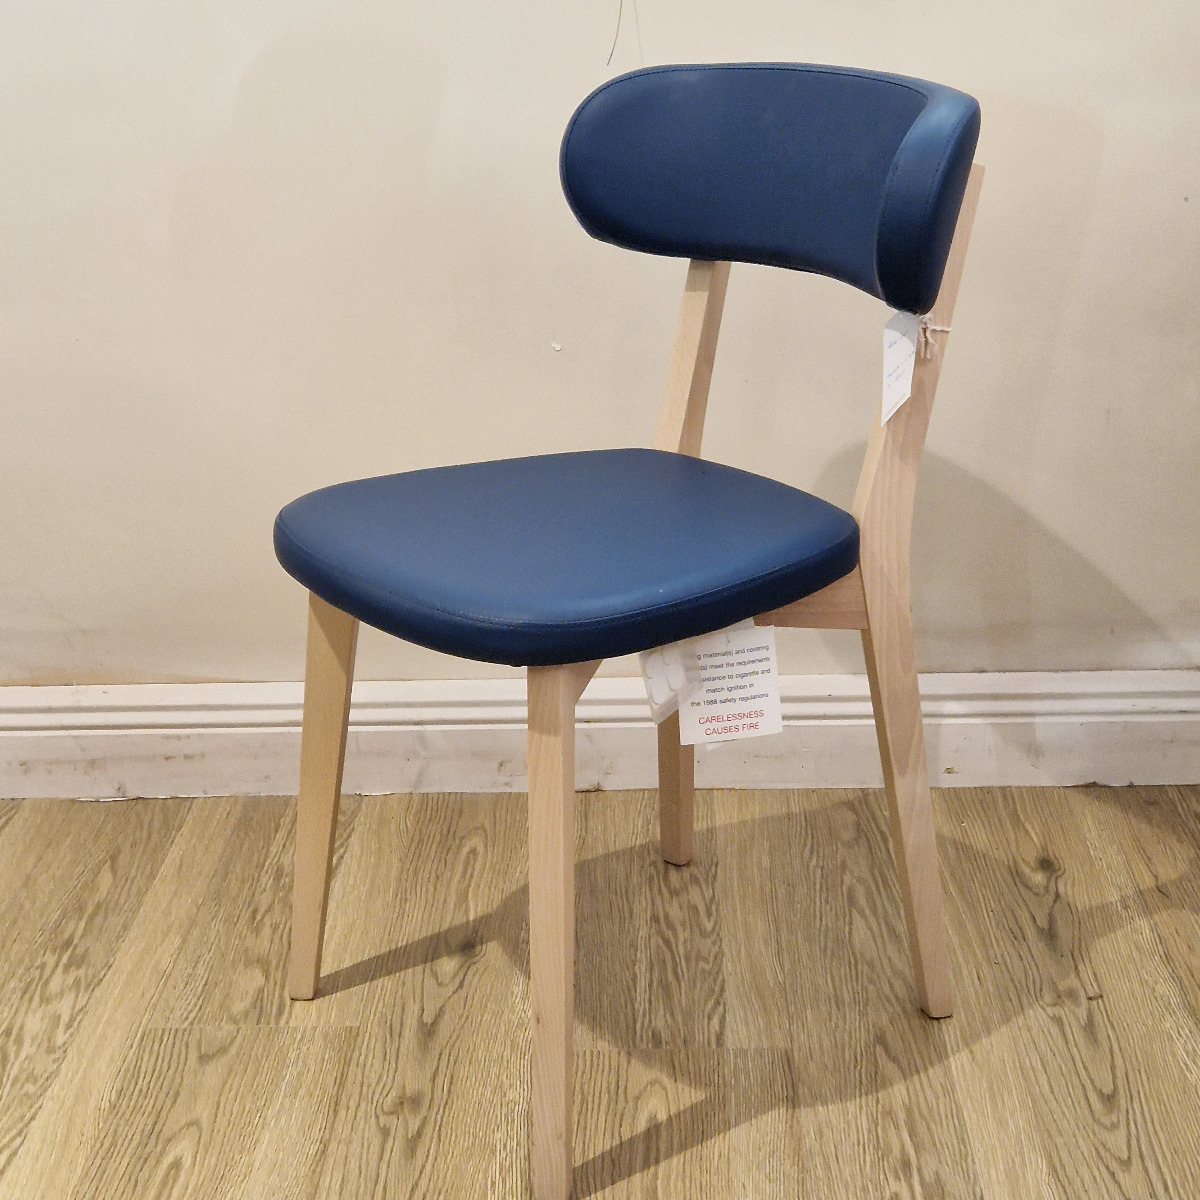 Peter Chair in Navy